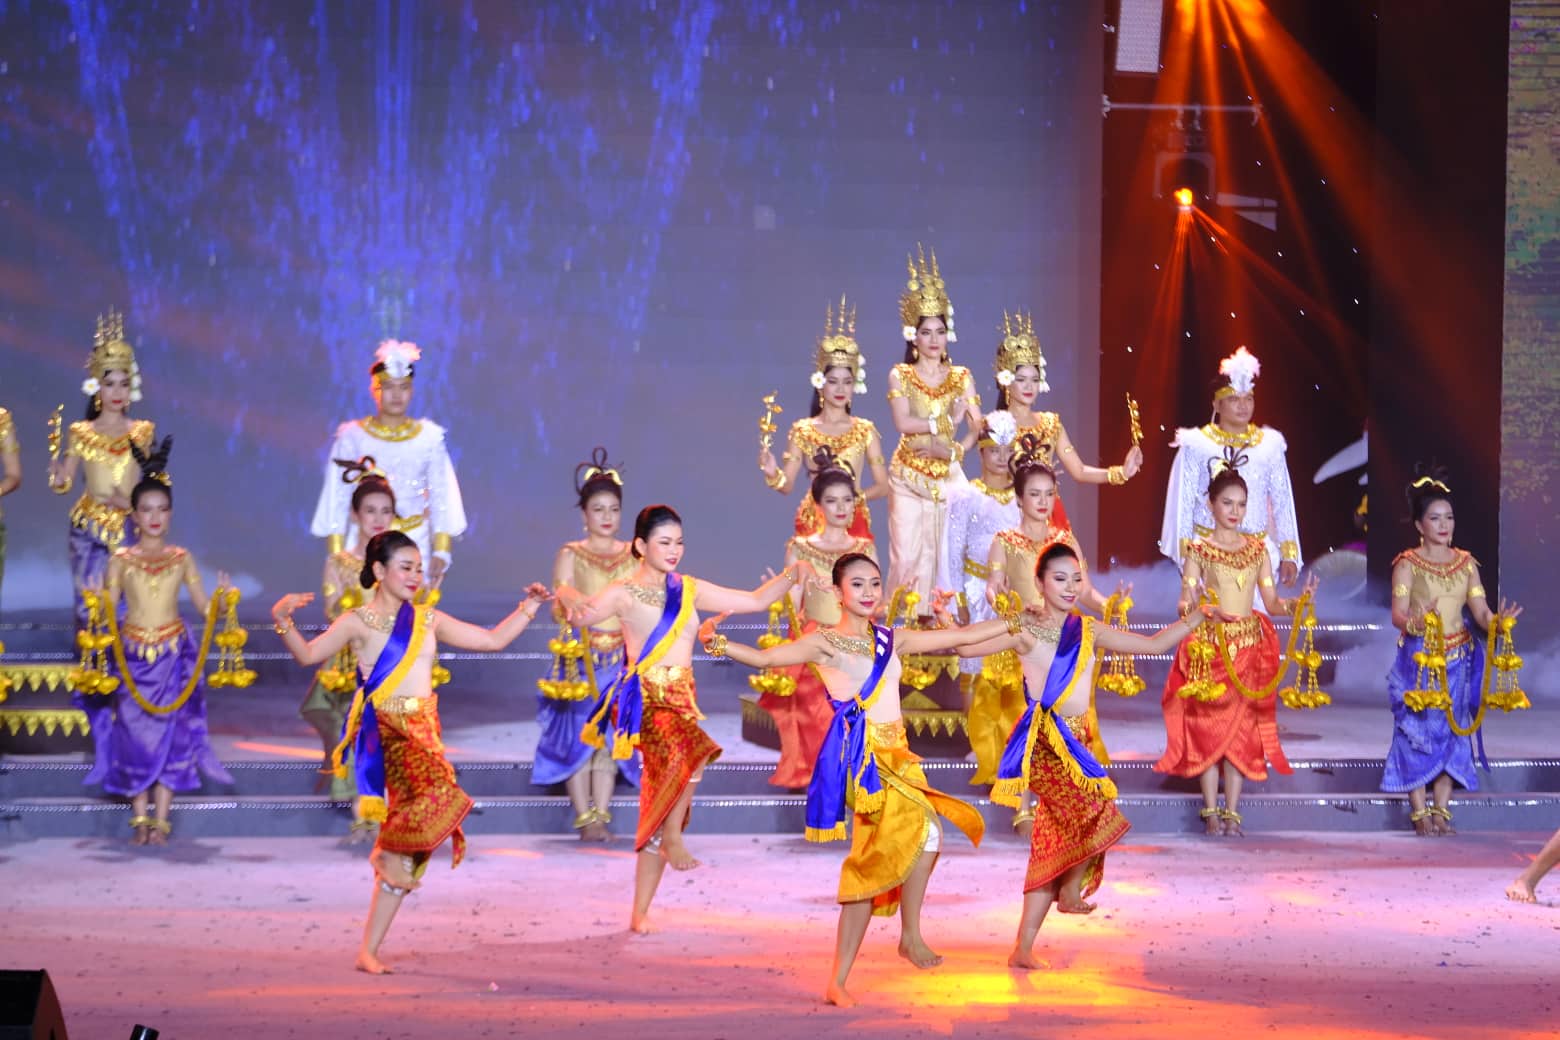 A performance by Cambodia, which will host the 2023 edition of the SEA Games, at the 31st SEA Games closing ceremony in Hanoi, May 23, 2022. Photo: Nam Tran / Tuoi Tre